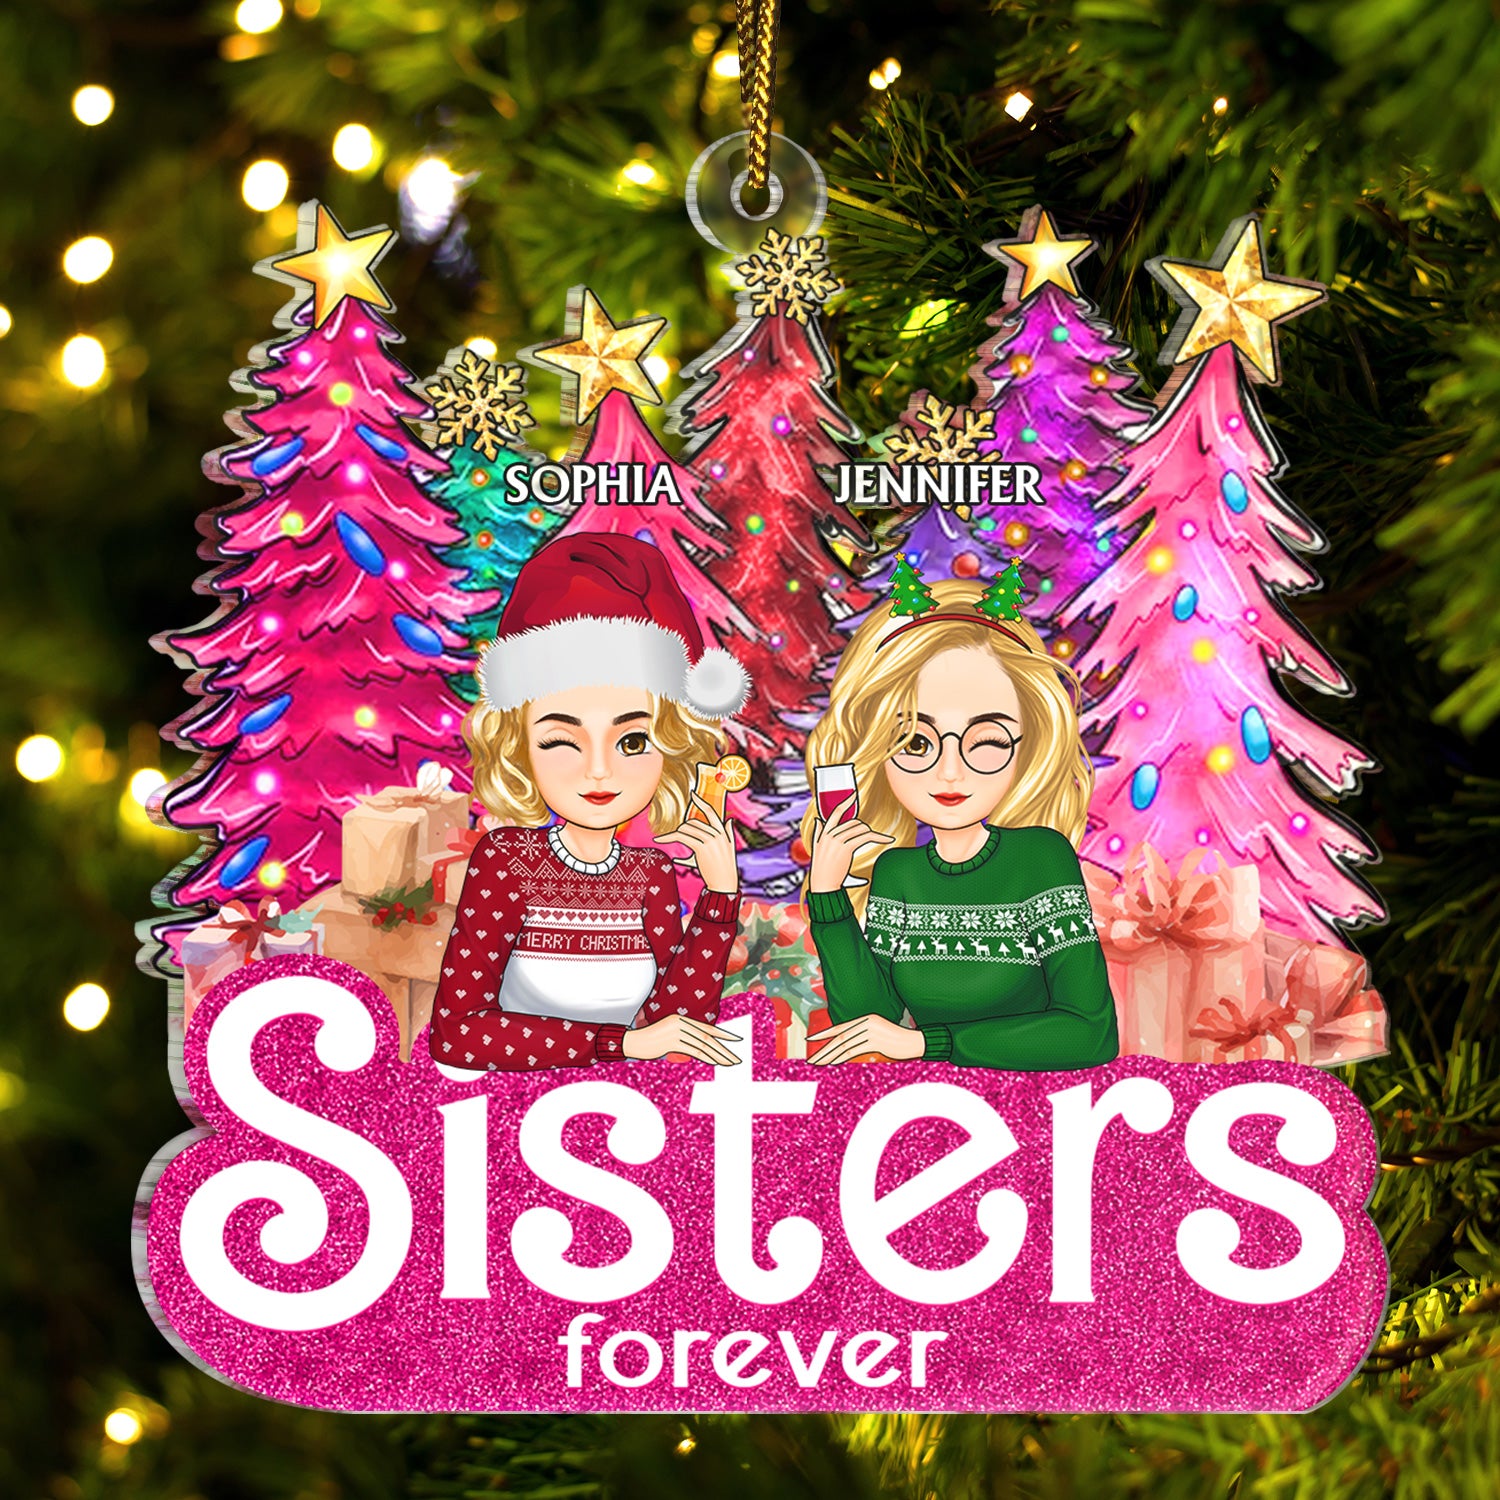 Sisters Forever Pine Tree - Christmas Gifts For Besties, Friends - Personalized Cutout Acrylic Ornament